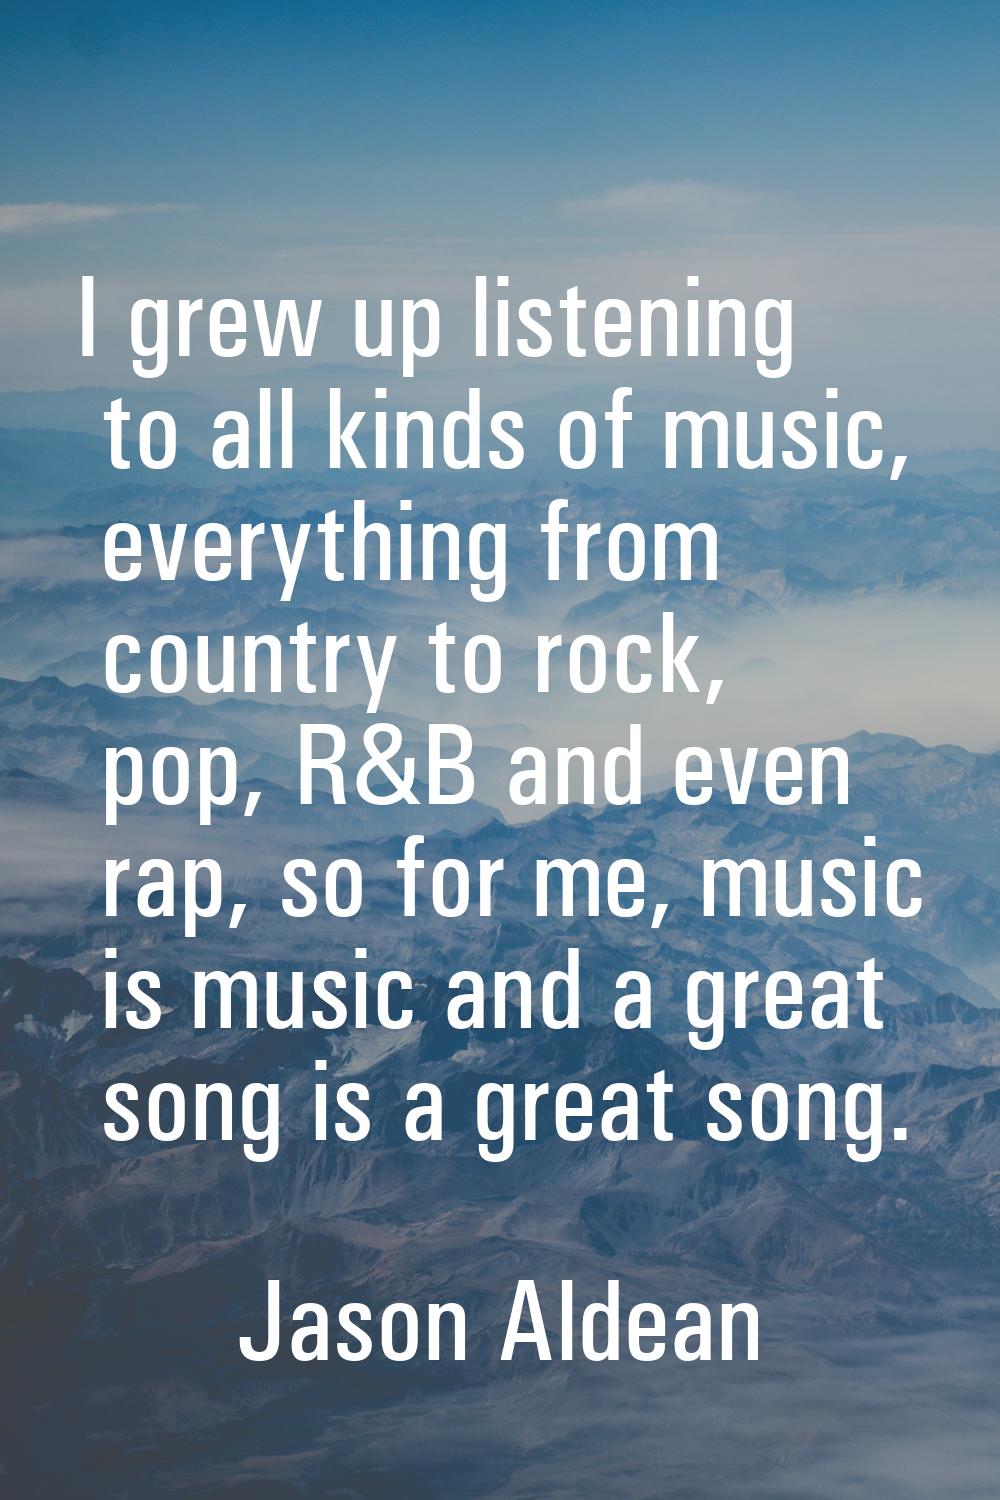 I grew up listening to all kinds of music, everything from country to rock, pop, R&B and even rap, 